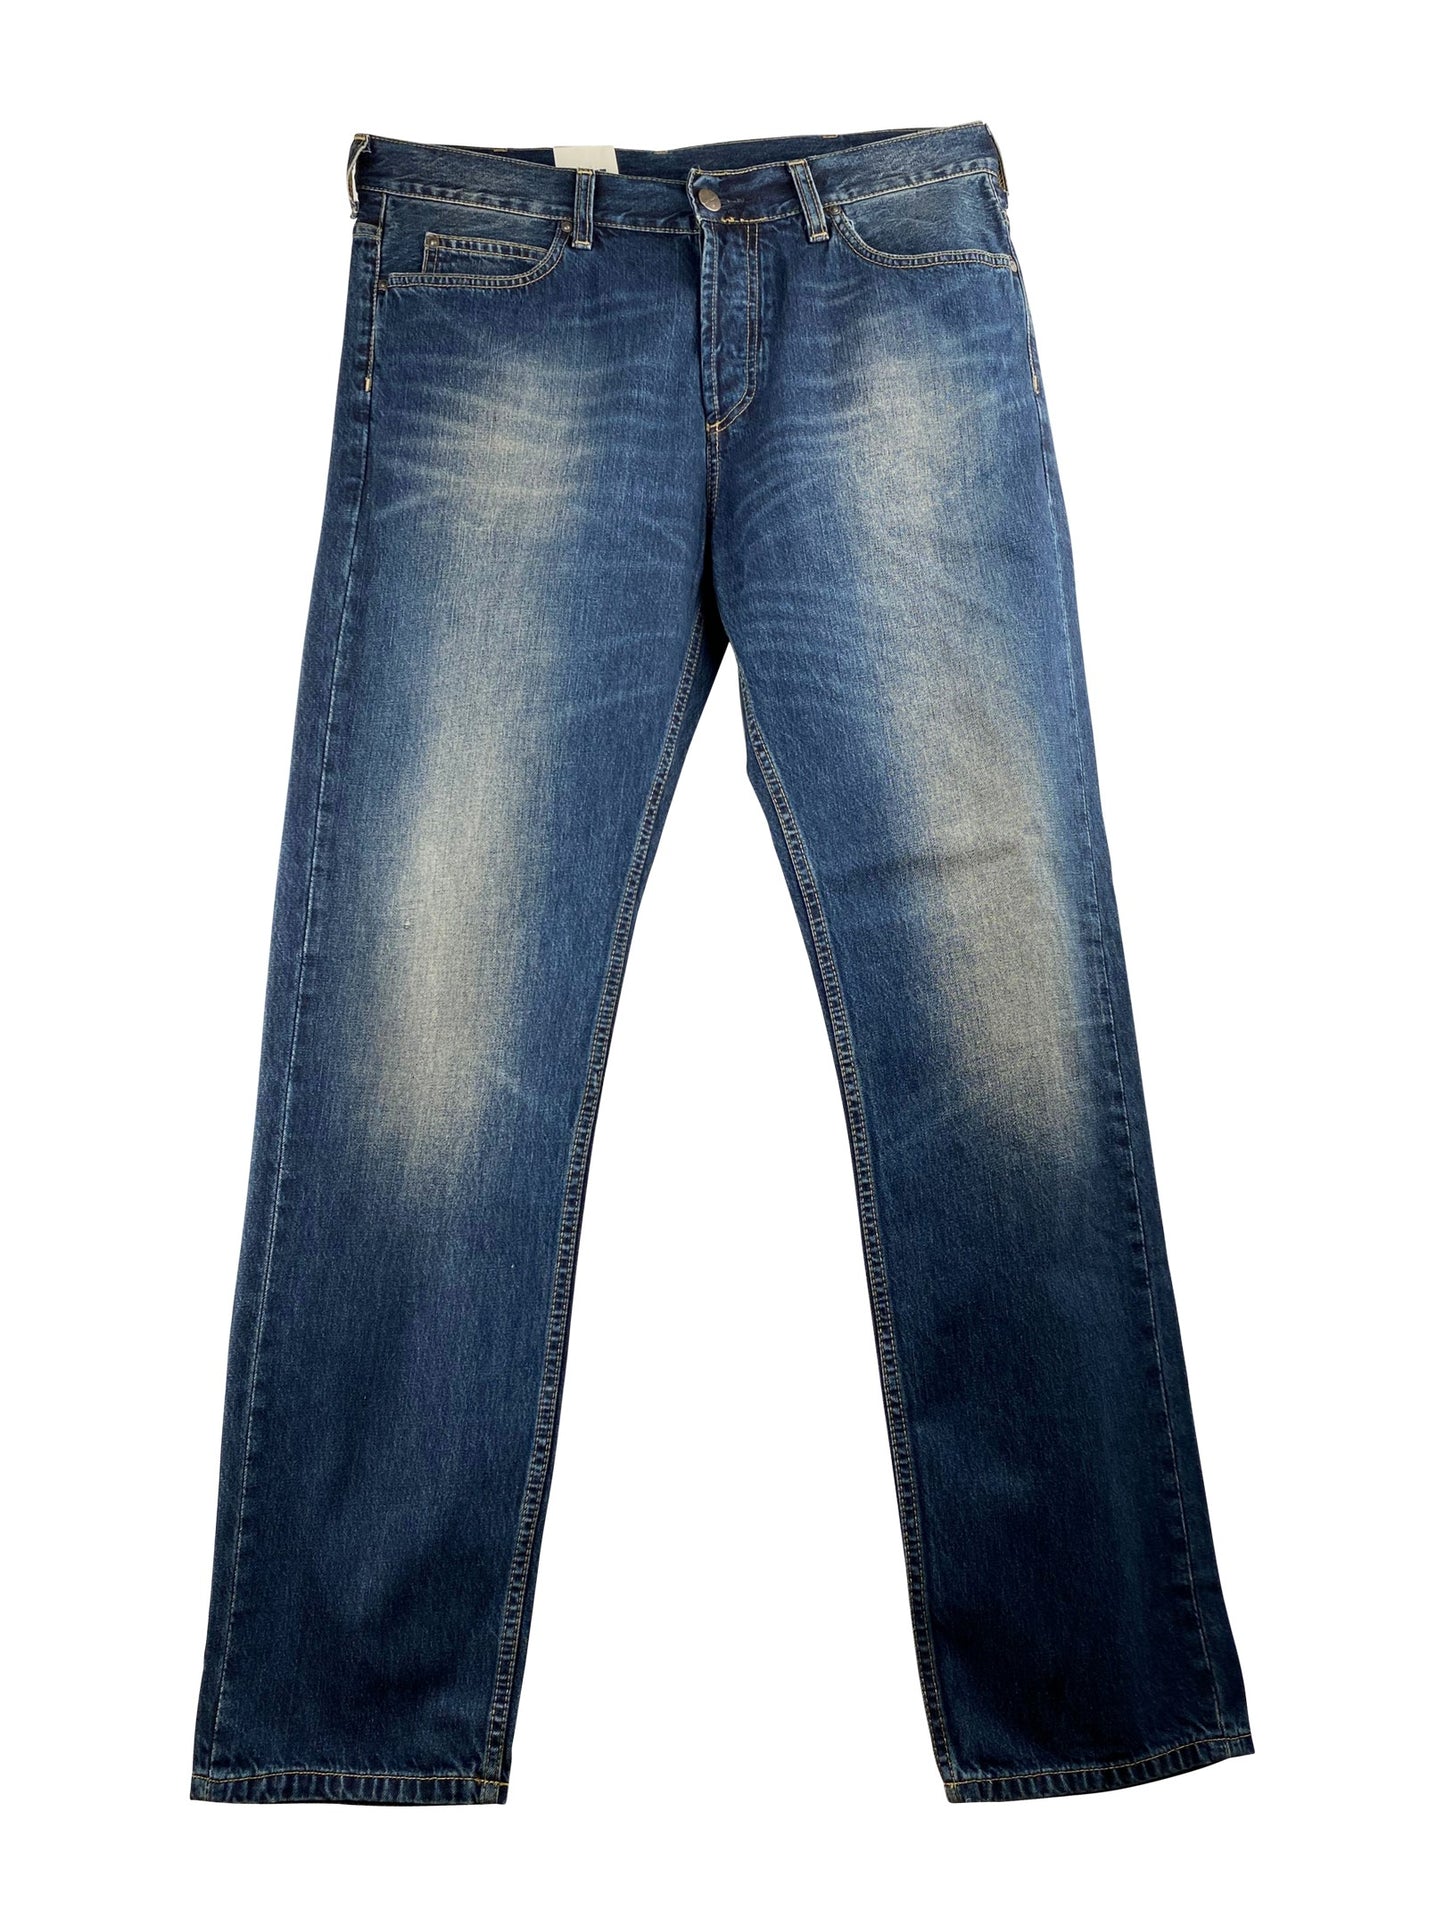 Carhartt Jeans “Marlow Pant Hanford” -coast washed